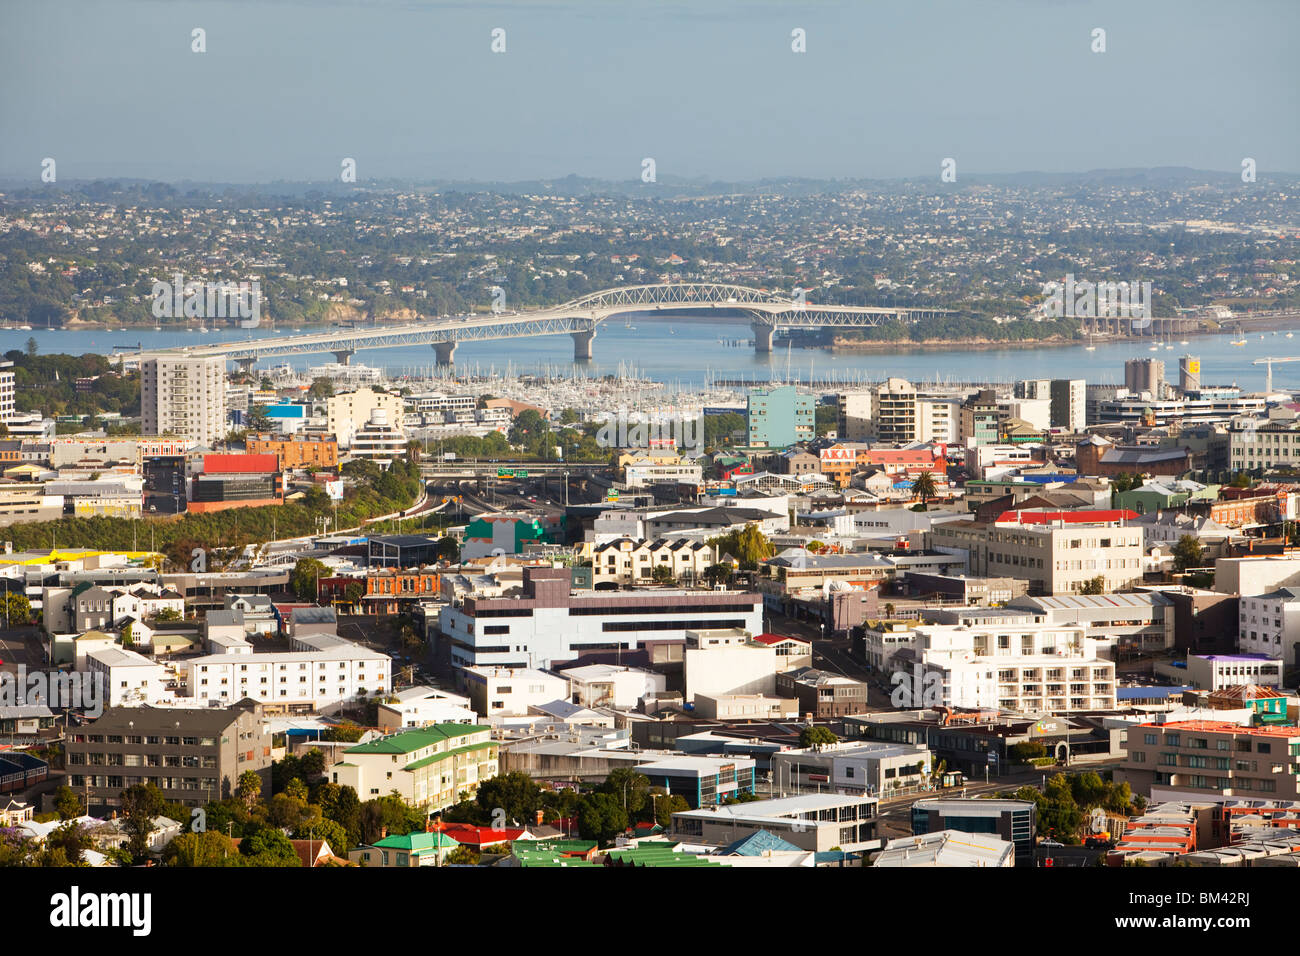 View of city and Auckland Harbour Bridge from Mt Eden (Maungawhau). Auckland, North Island, New Zealand Stock Photo